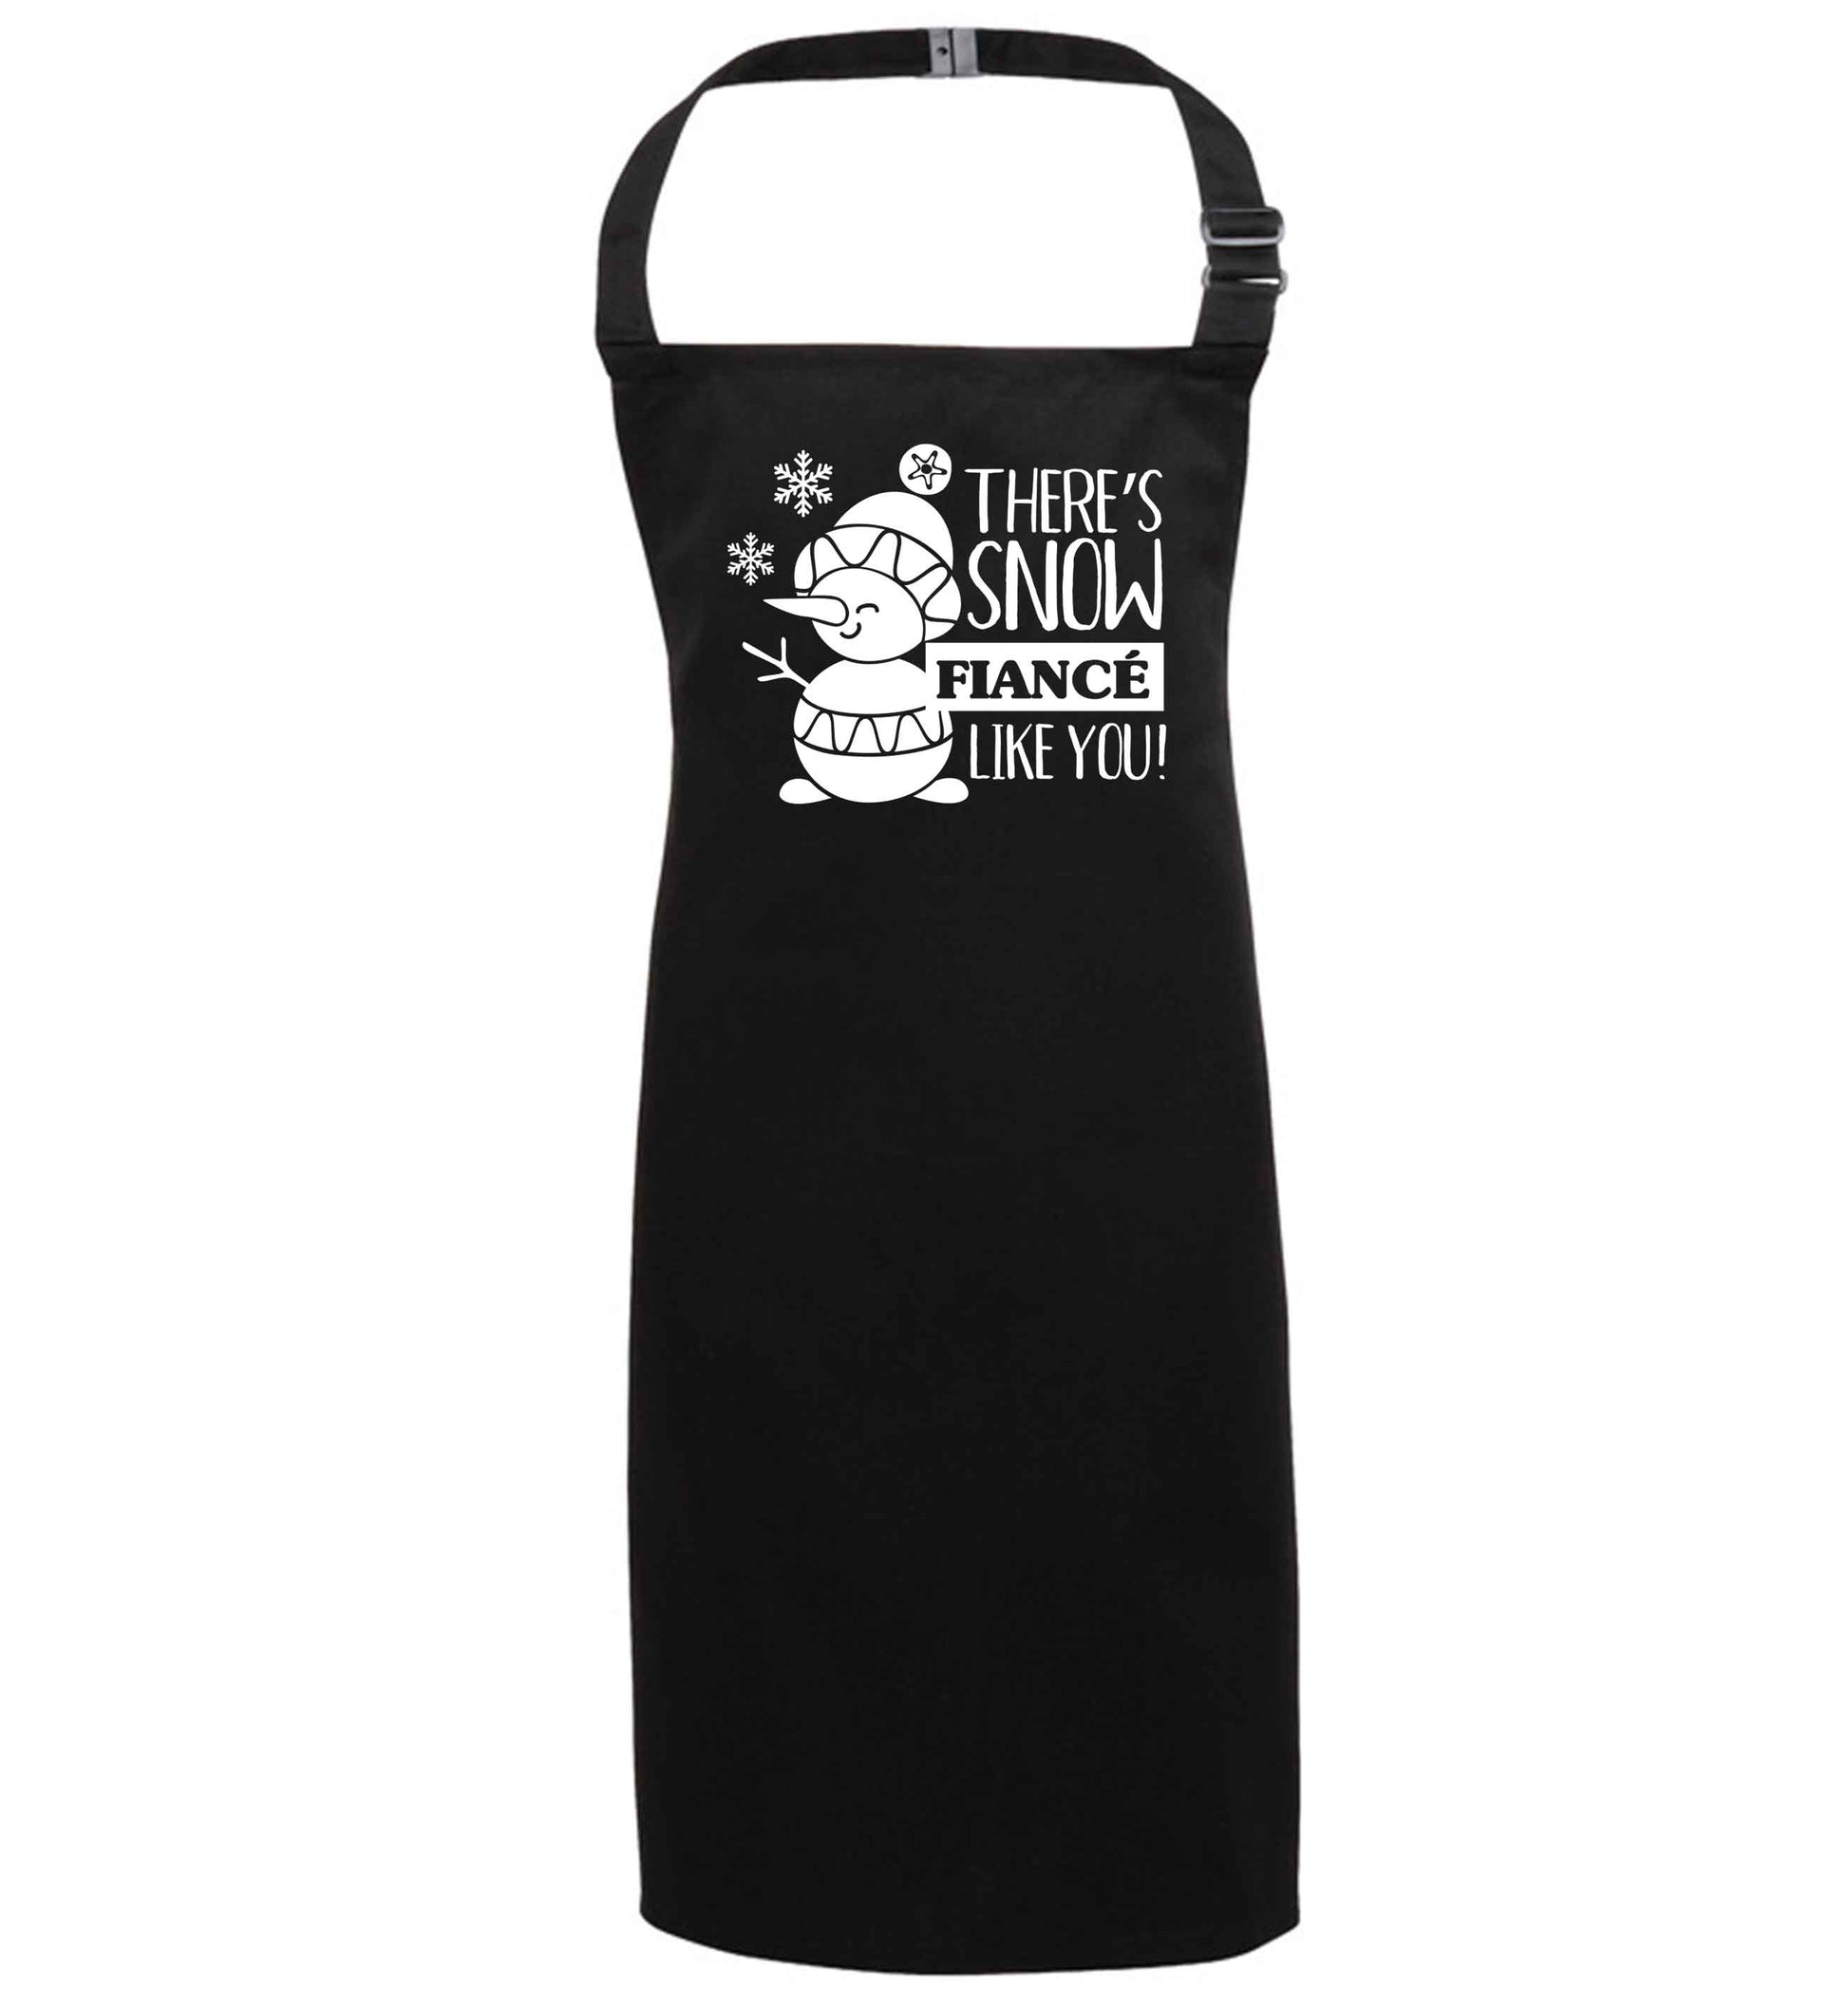 There's snow fiance like you black apron 7-10 years